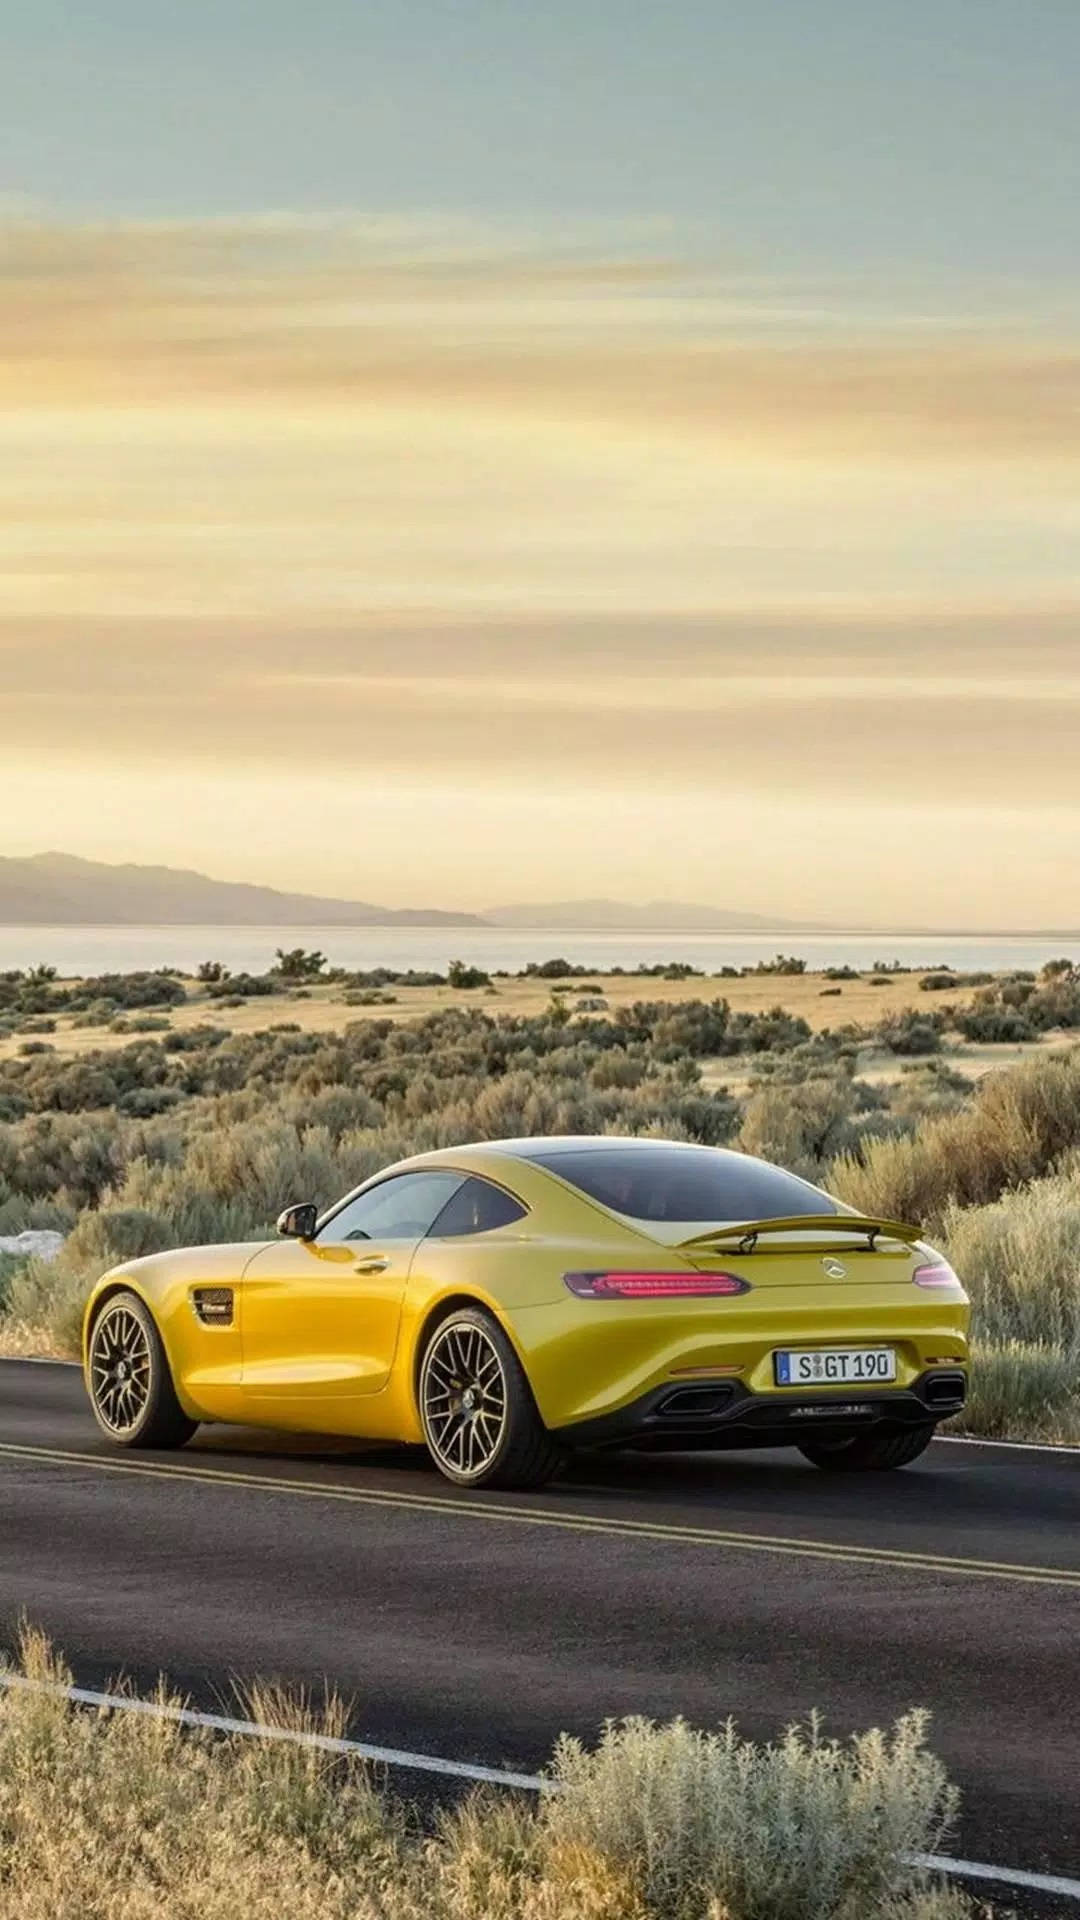 Exquisite Mercedes-AMG GT with iPhone X entrenched in the interior Wallpaper